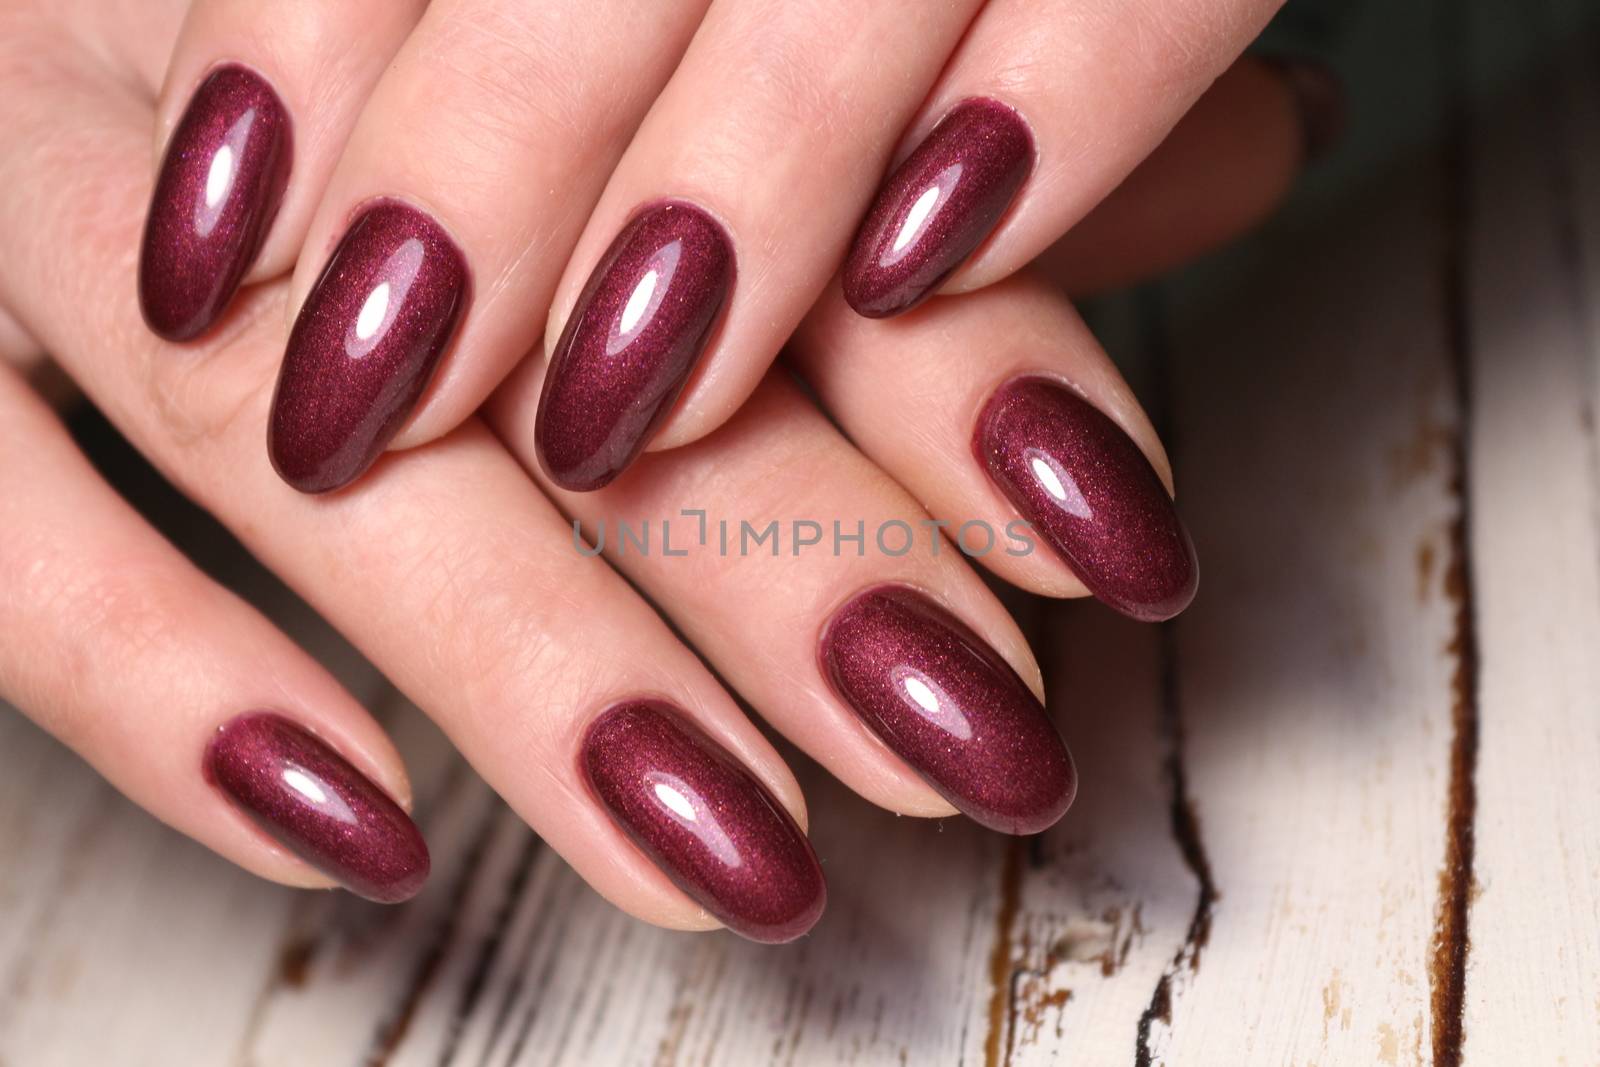 Youth manicure design, color coffee with gold by SmirMaxStock